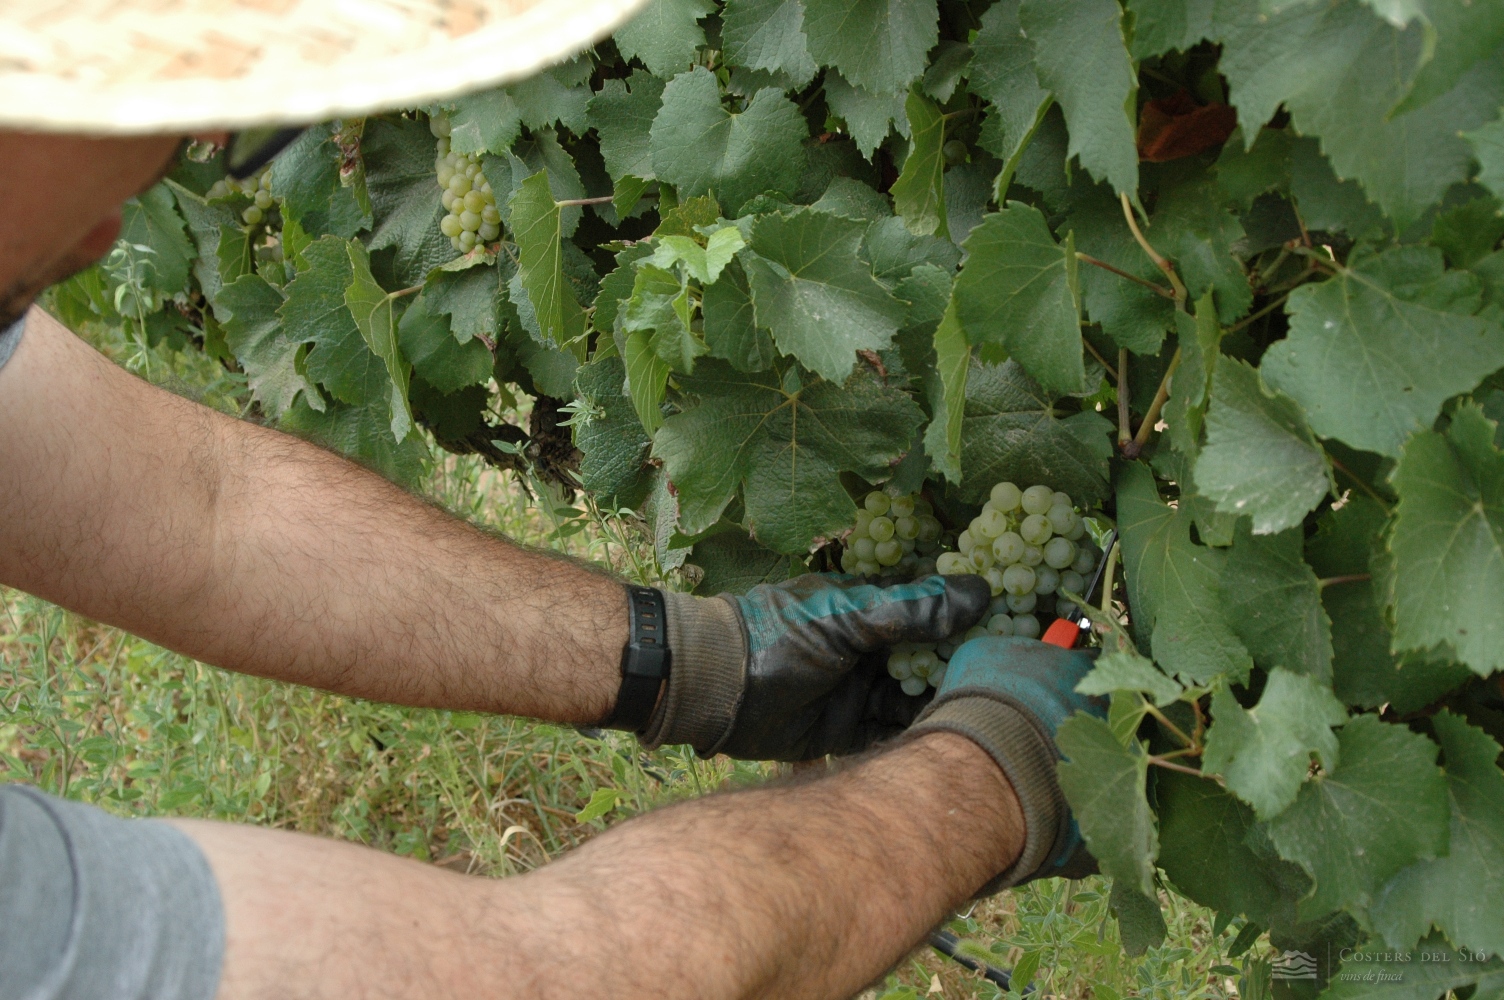 Beginning of the harvest campaign at Costers del Sió